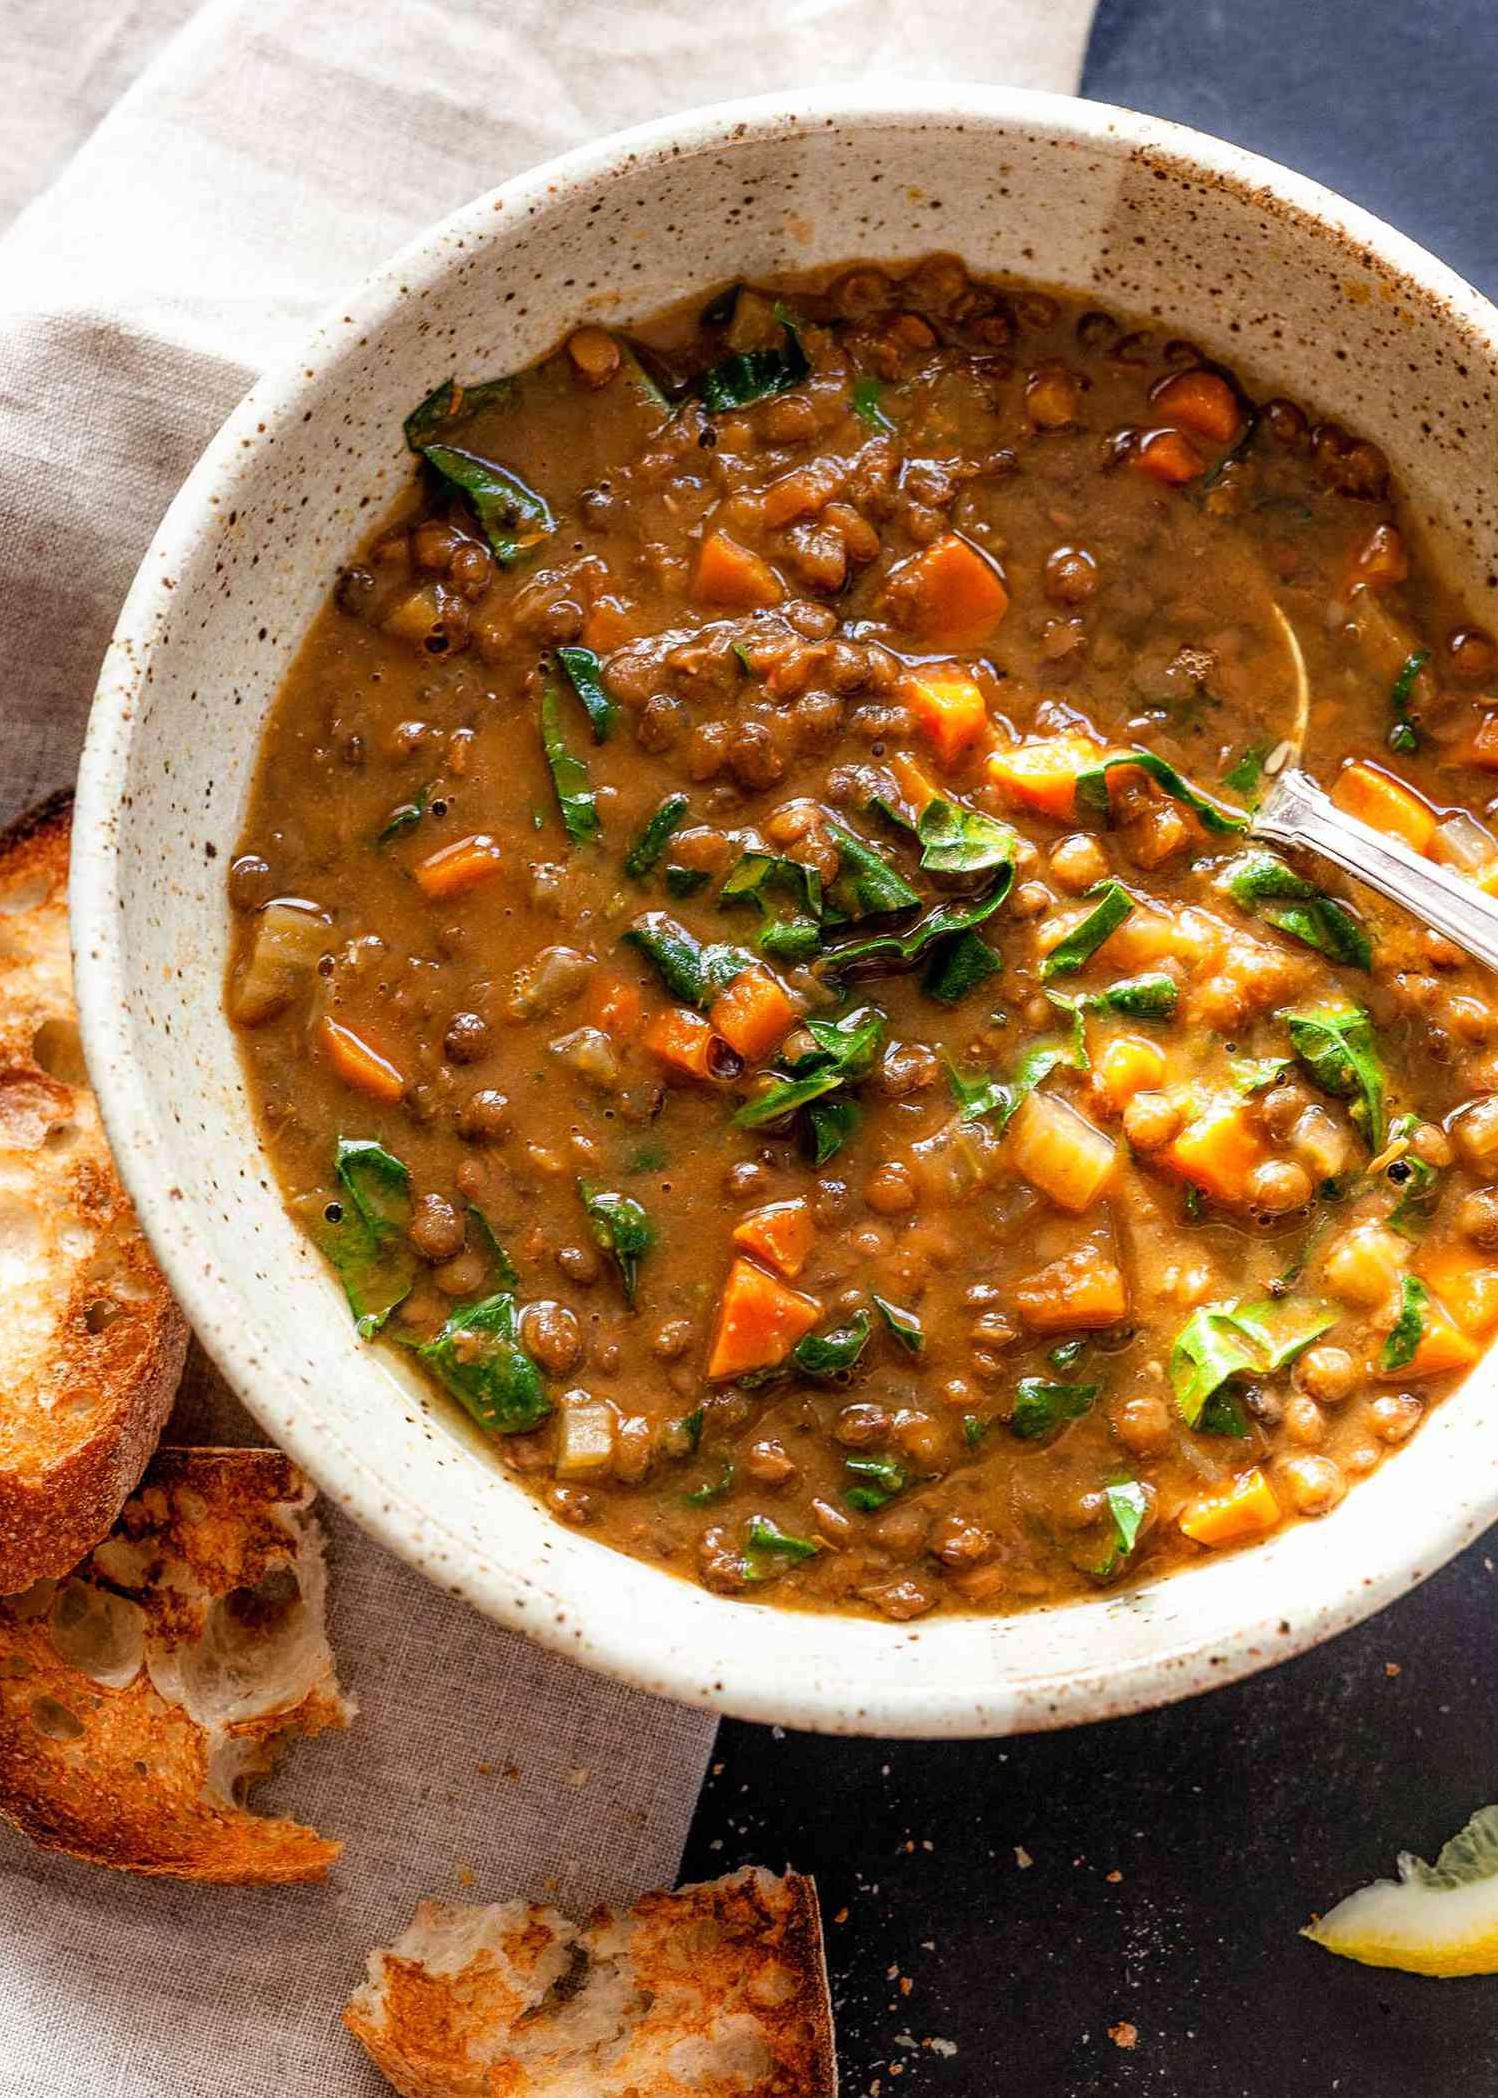  The perfect hearty and healthy meal for chilly nights.